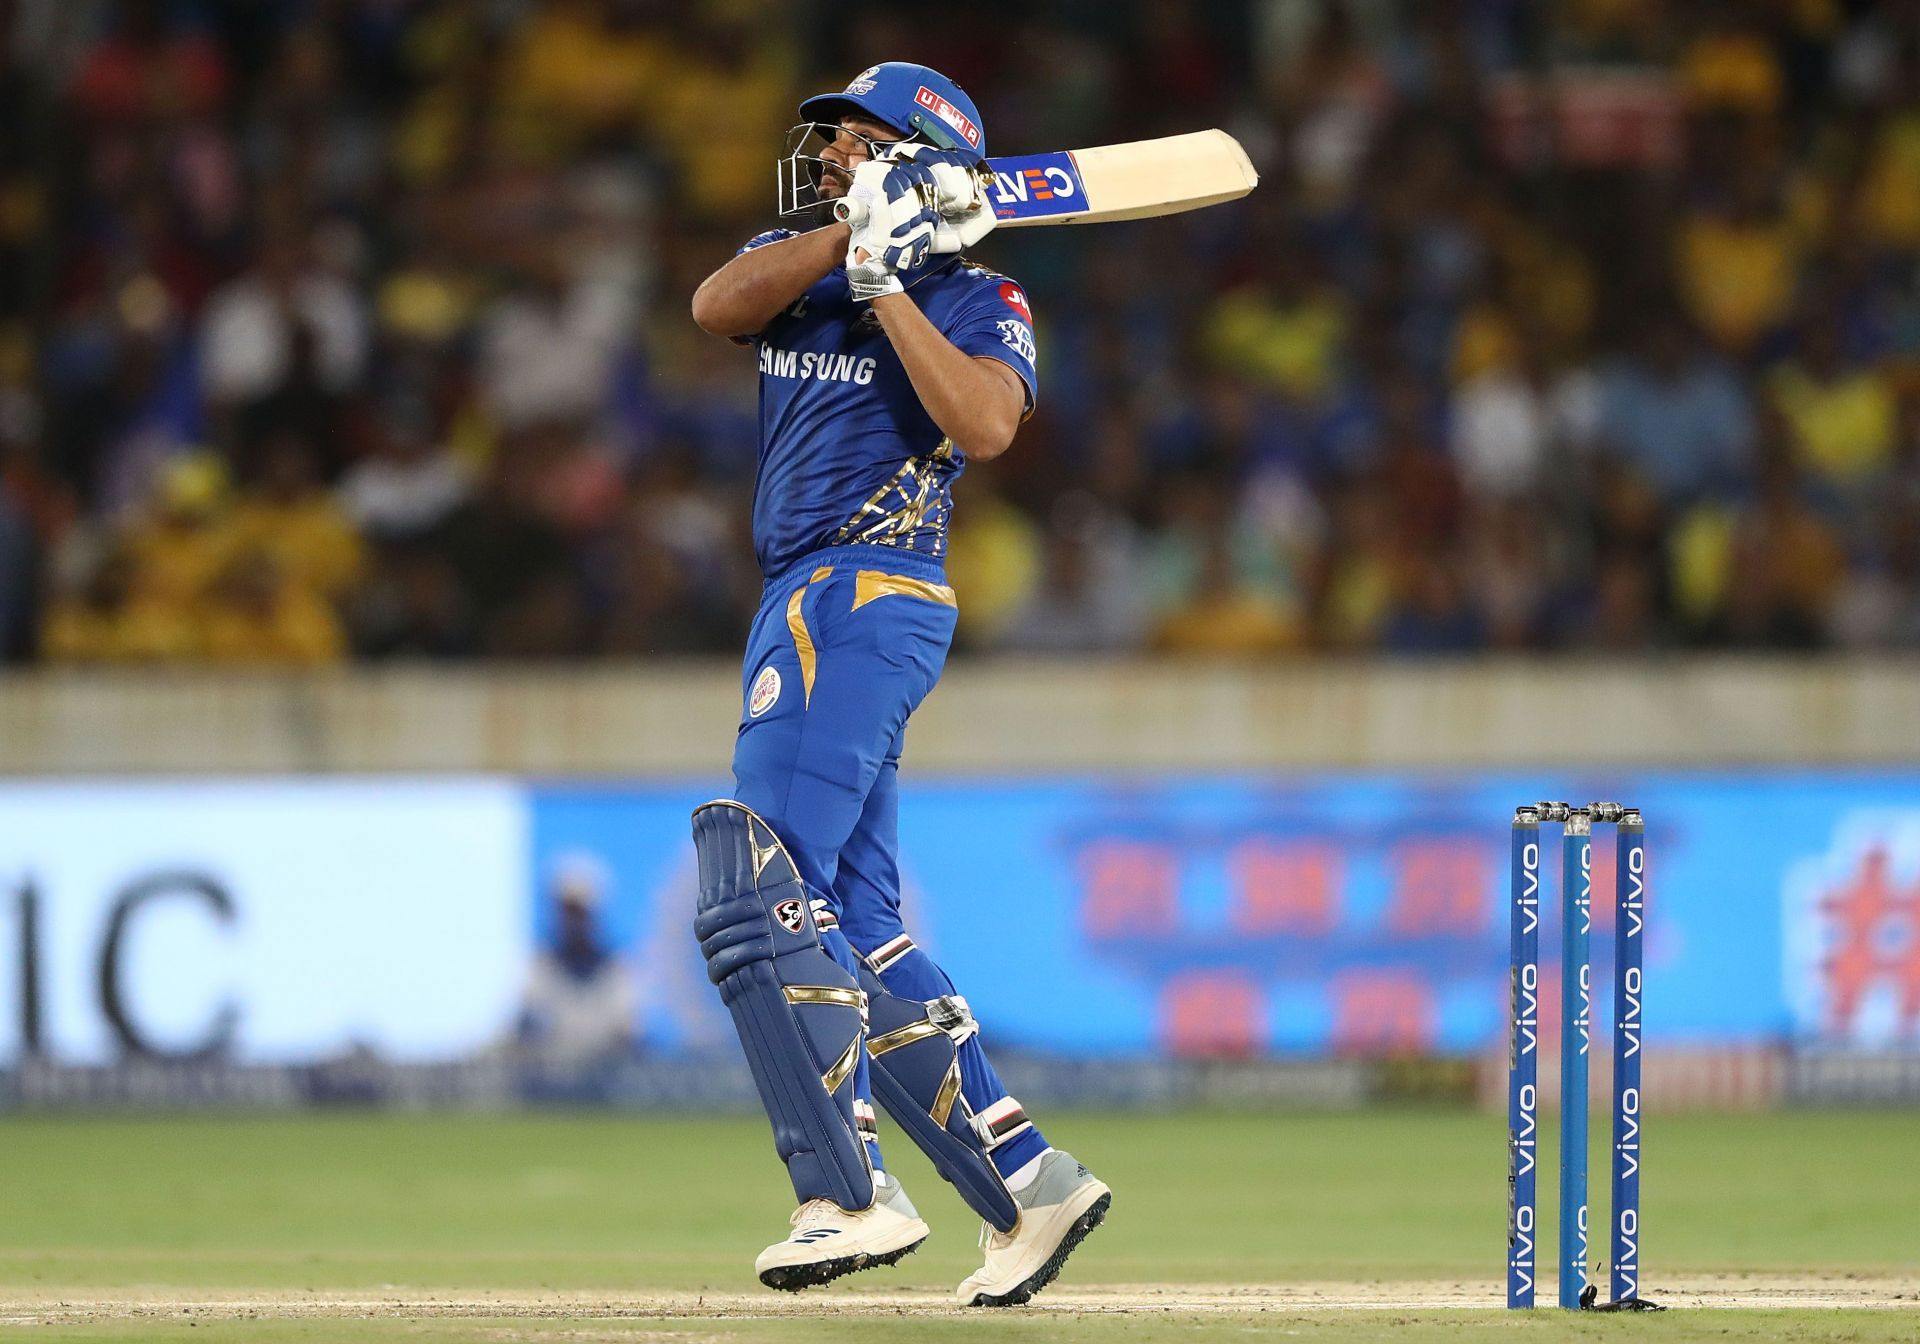 Rohit Sharma has not scored a fifty in his 11 IPL innings